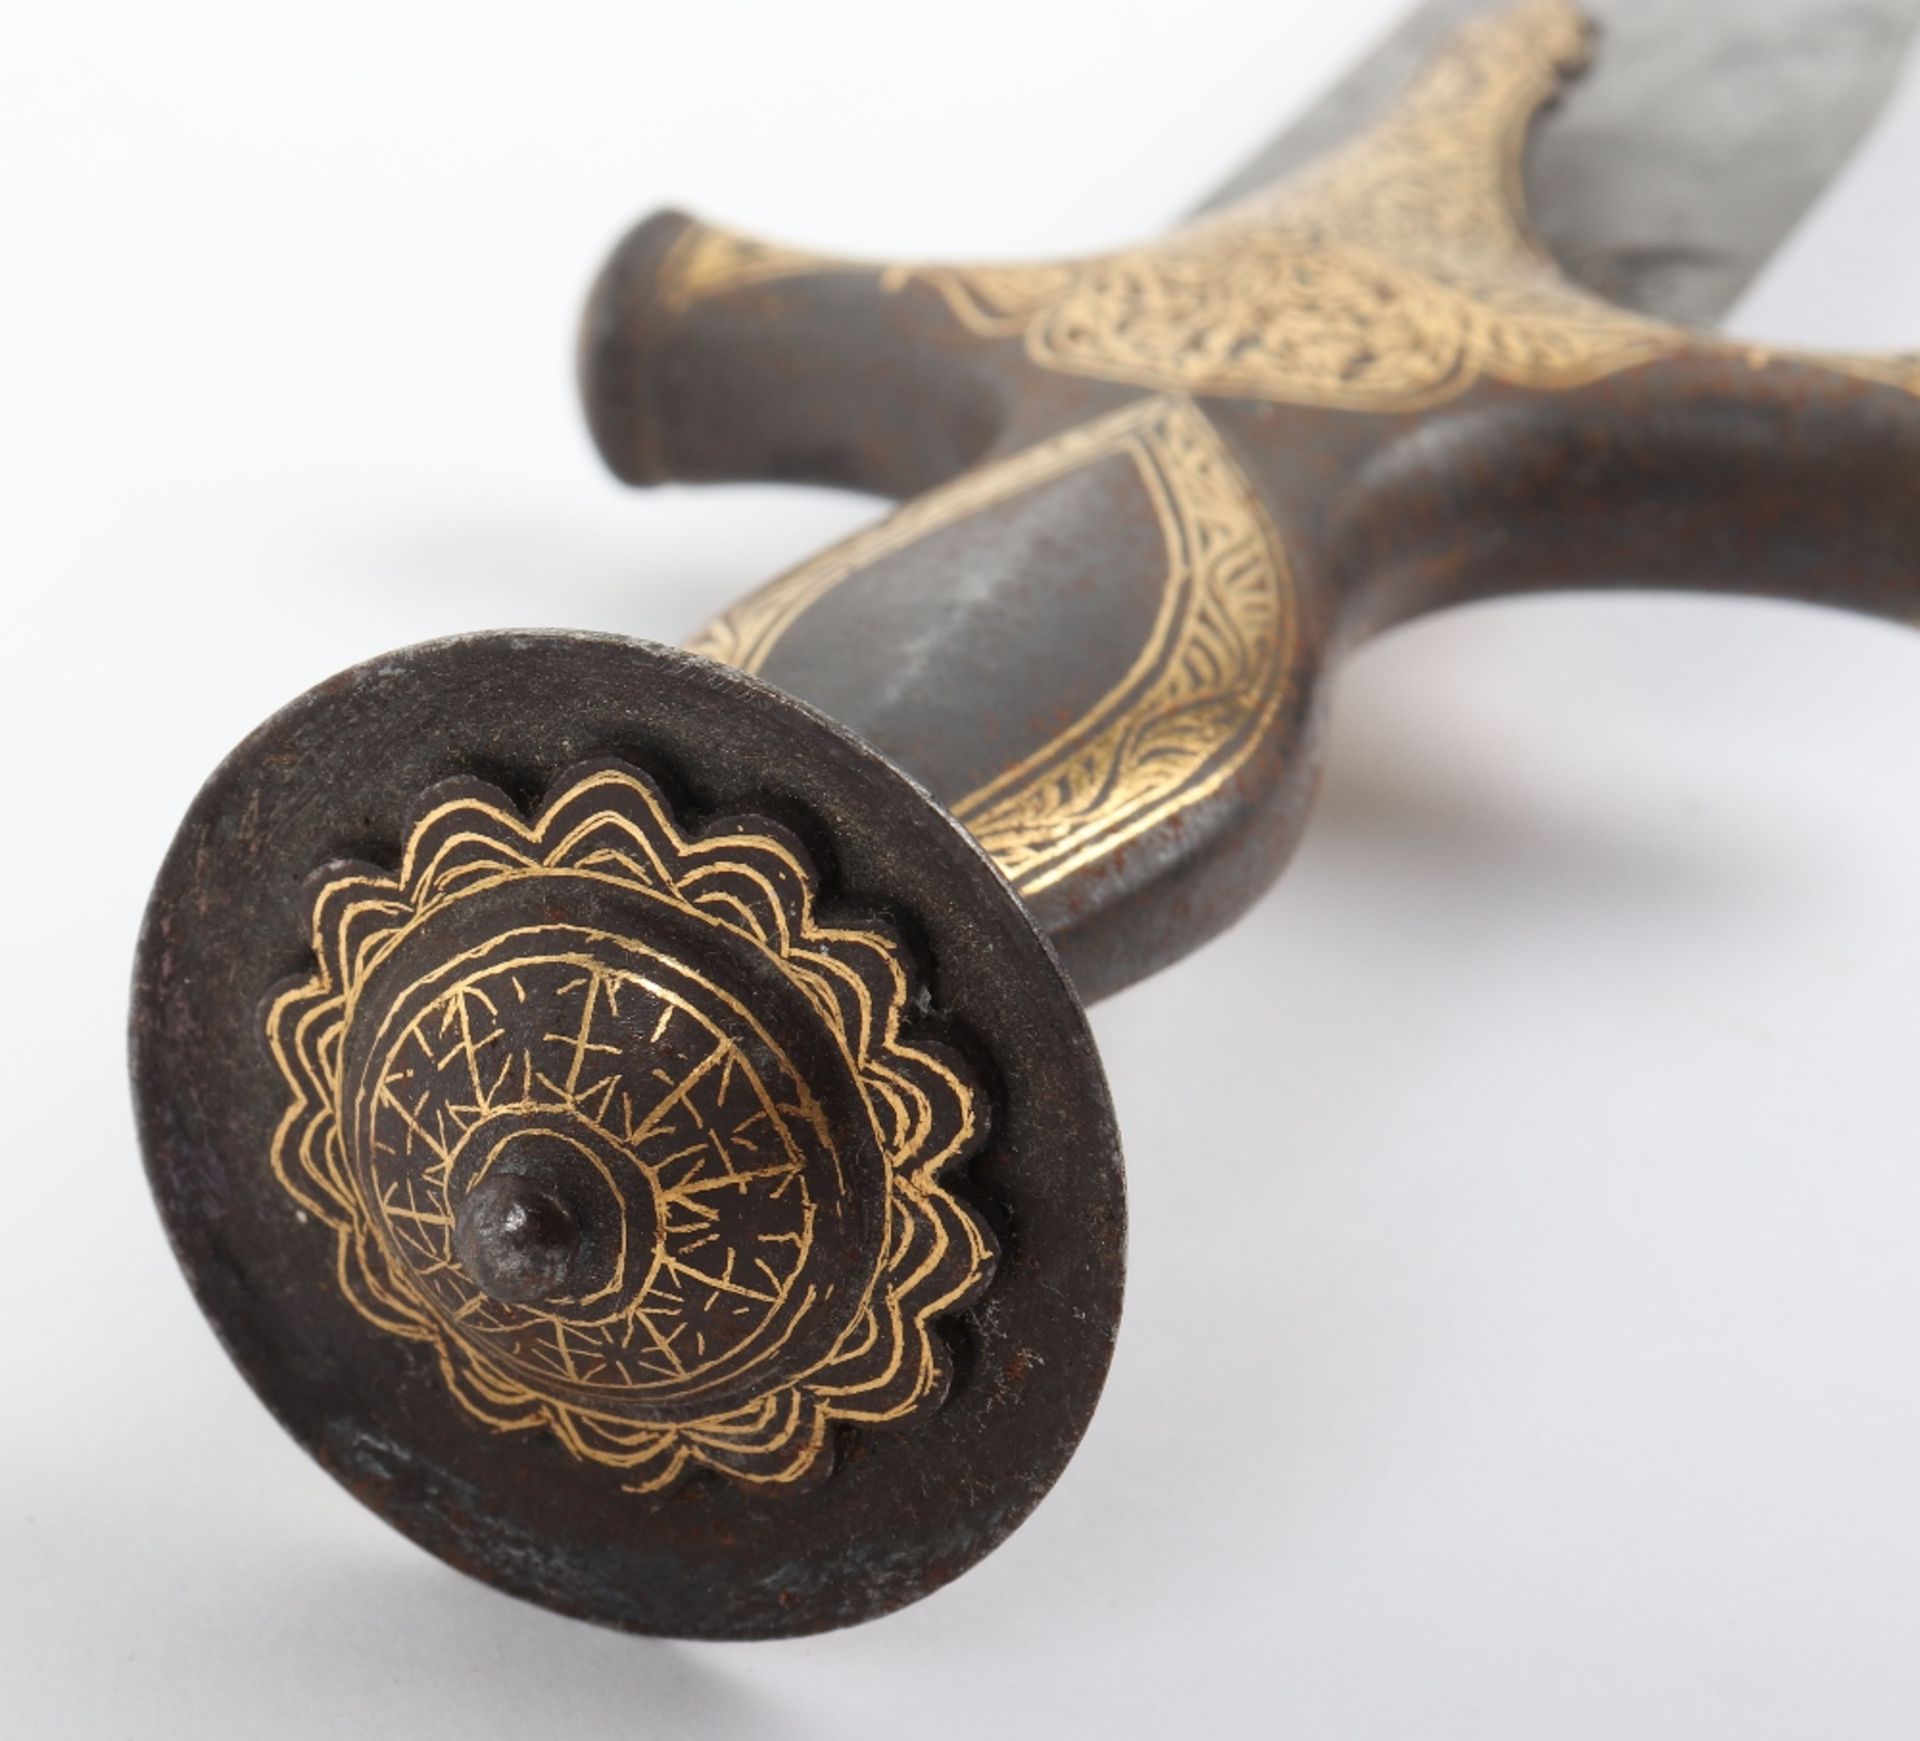 Decorative Indian Sword Tulwar Perhaps for a Youth - Image 8 of 13